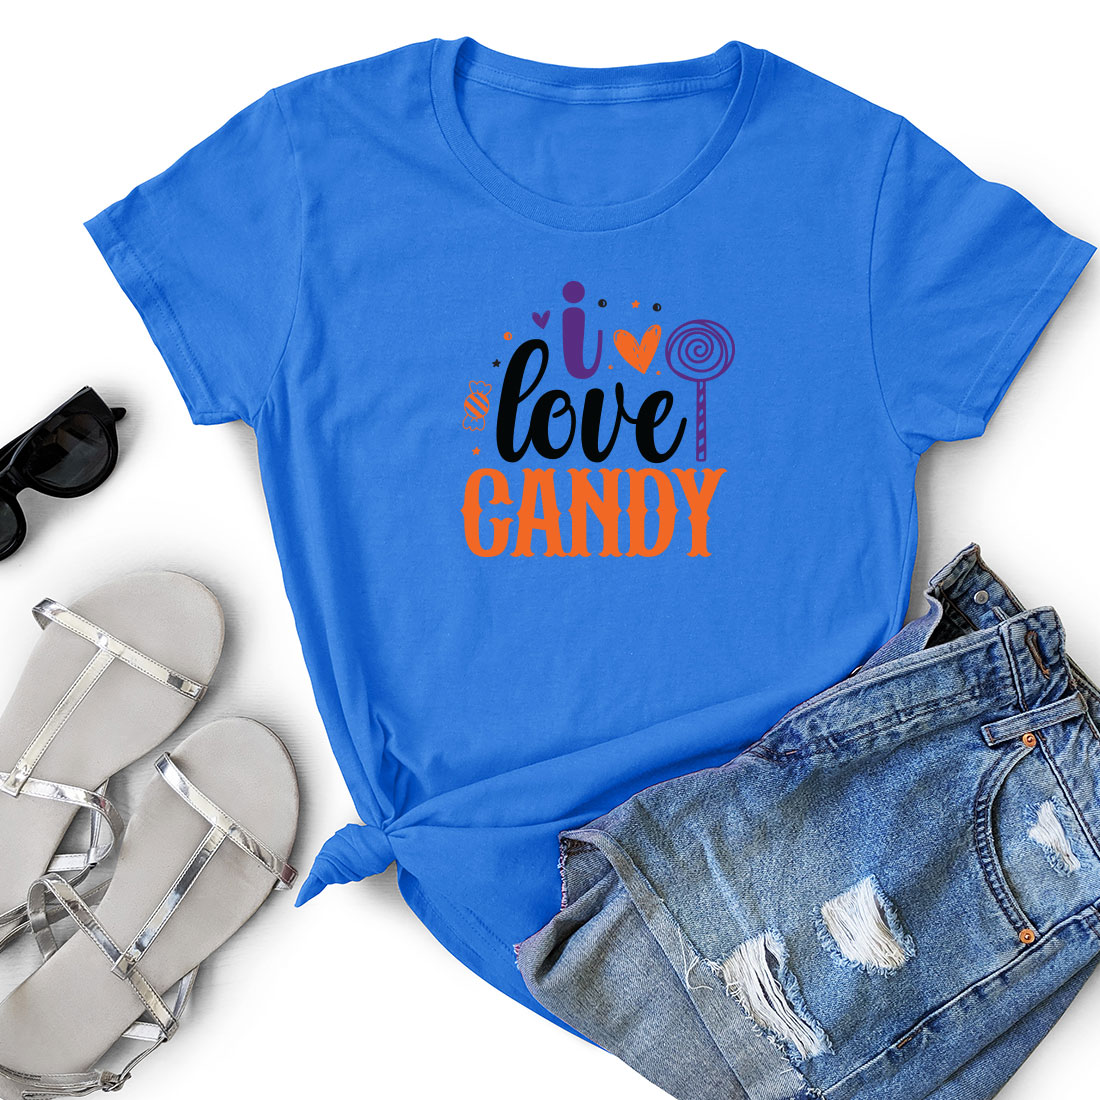 T - shirt that says i love candy next to a pair of shorts.